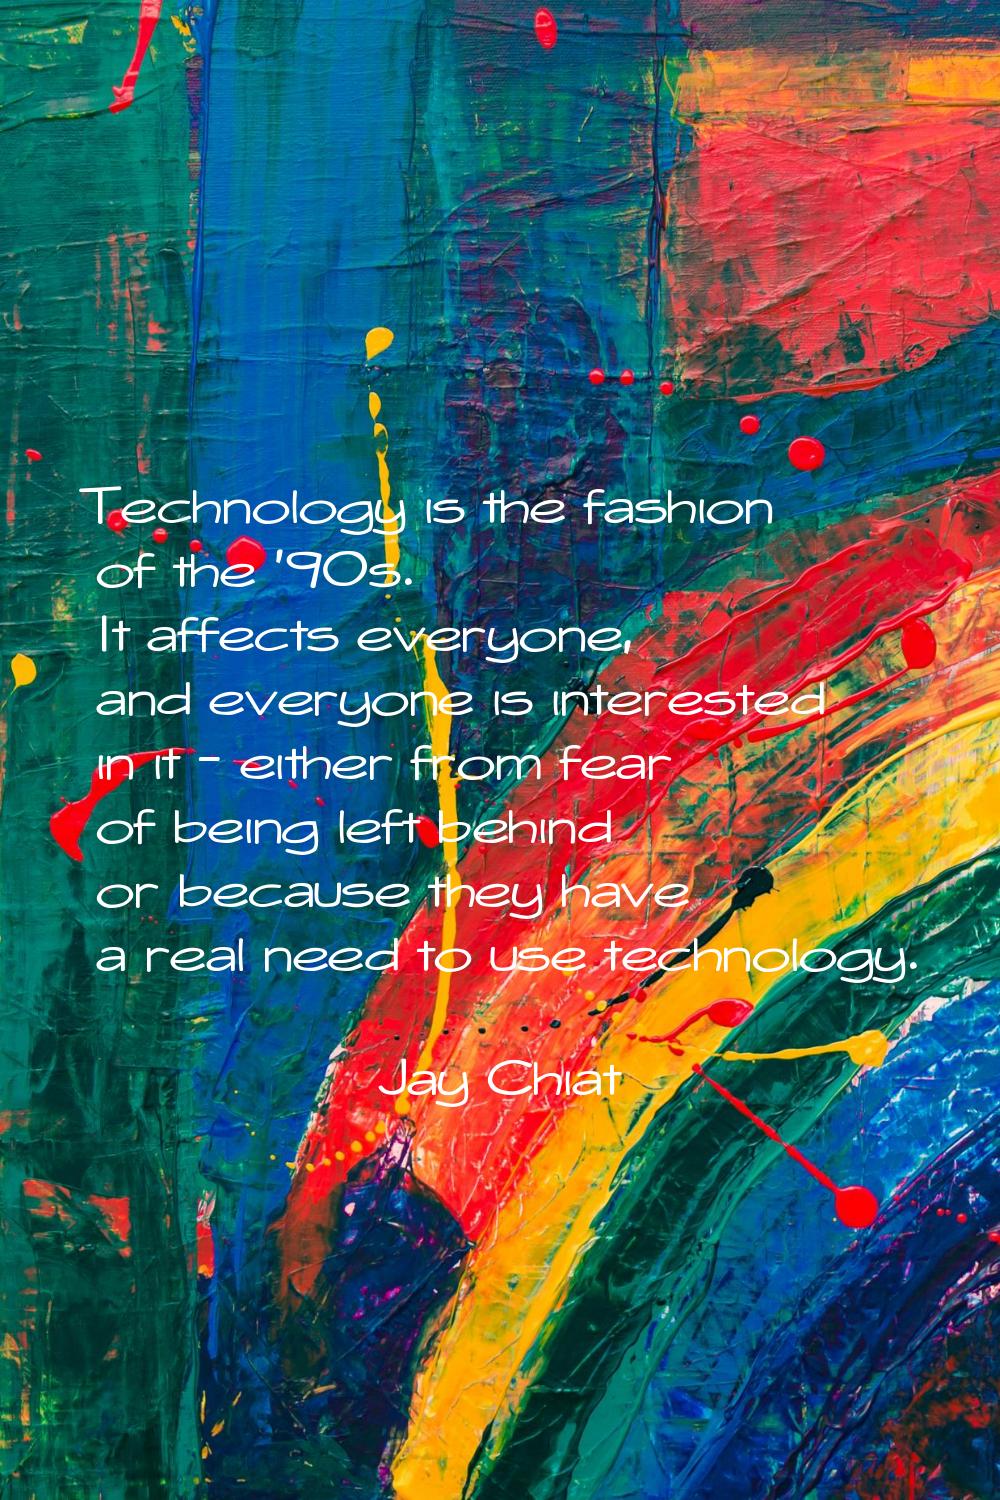 Technology is the fashion of the '90s. It affects everyone, and everyone is interested in it - eith